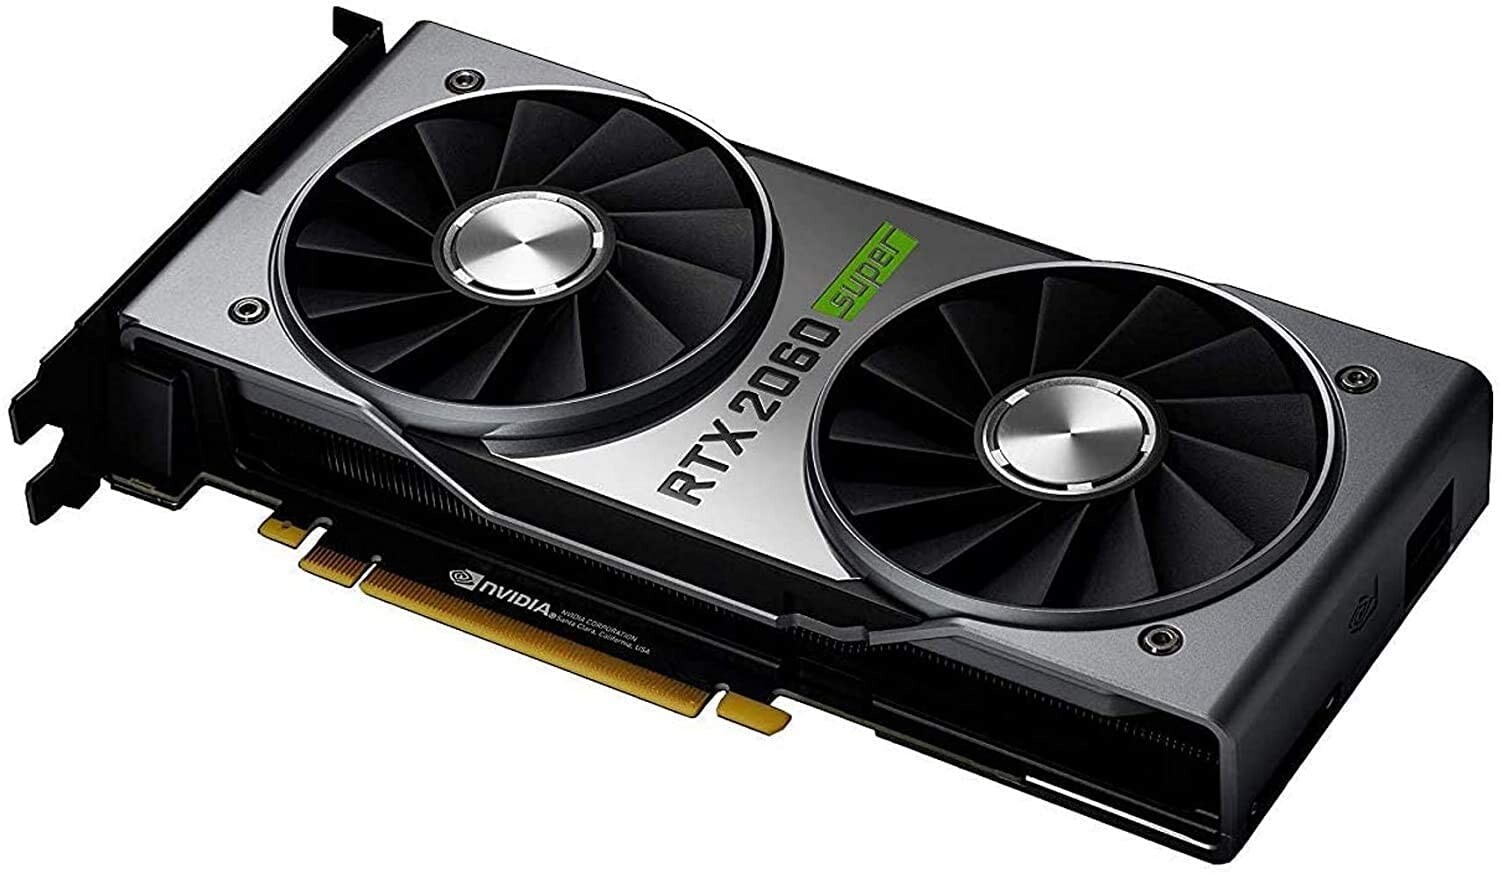 Technical details of the GeForce RTX 3000 - more than just a miraculous  increase in shaders